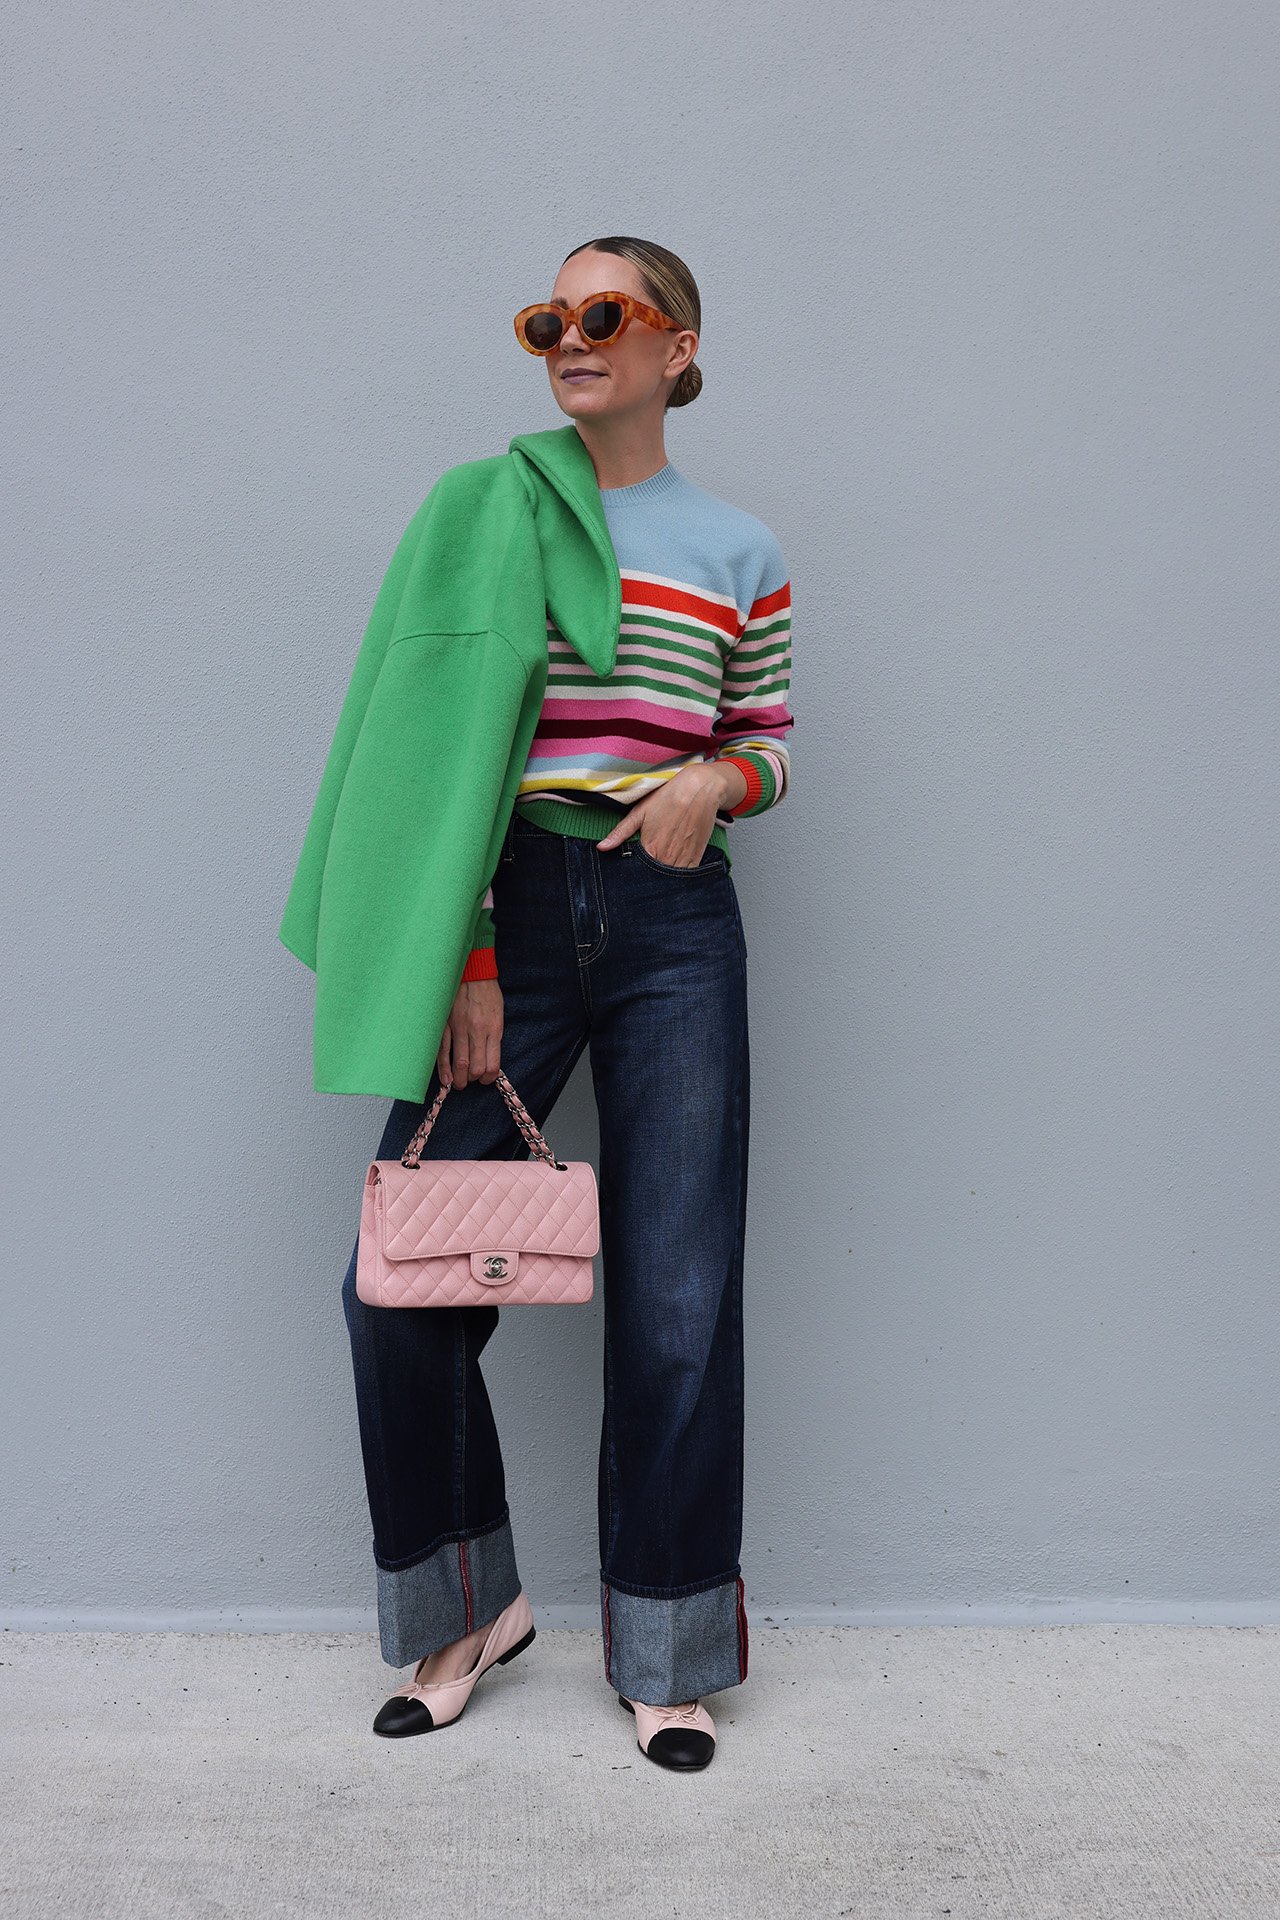 offered rainbow sweater, casual spring jeans look, styling denim with cuffs